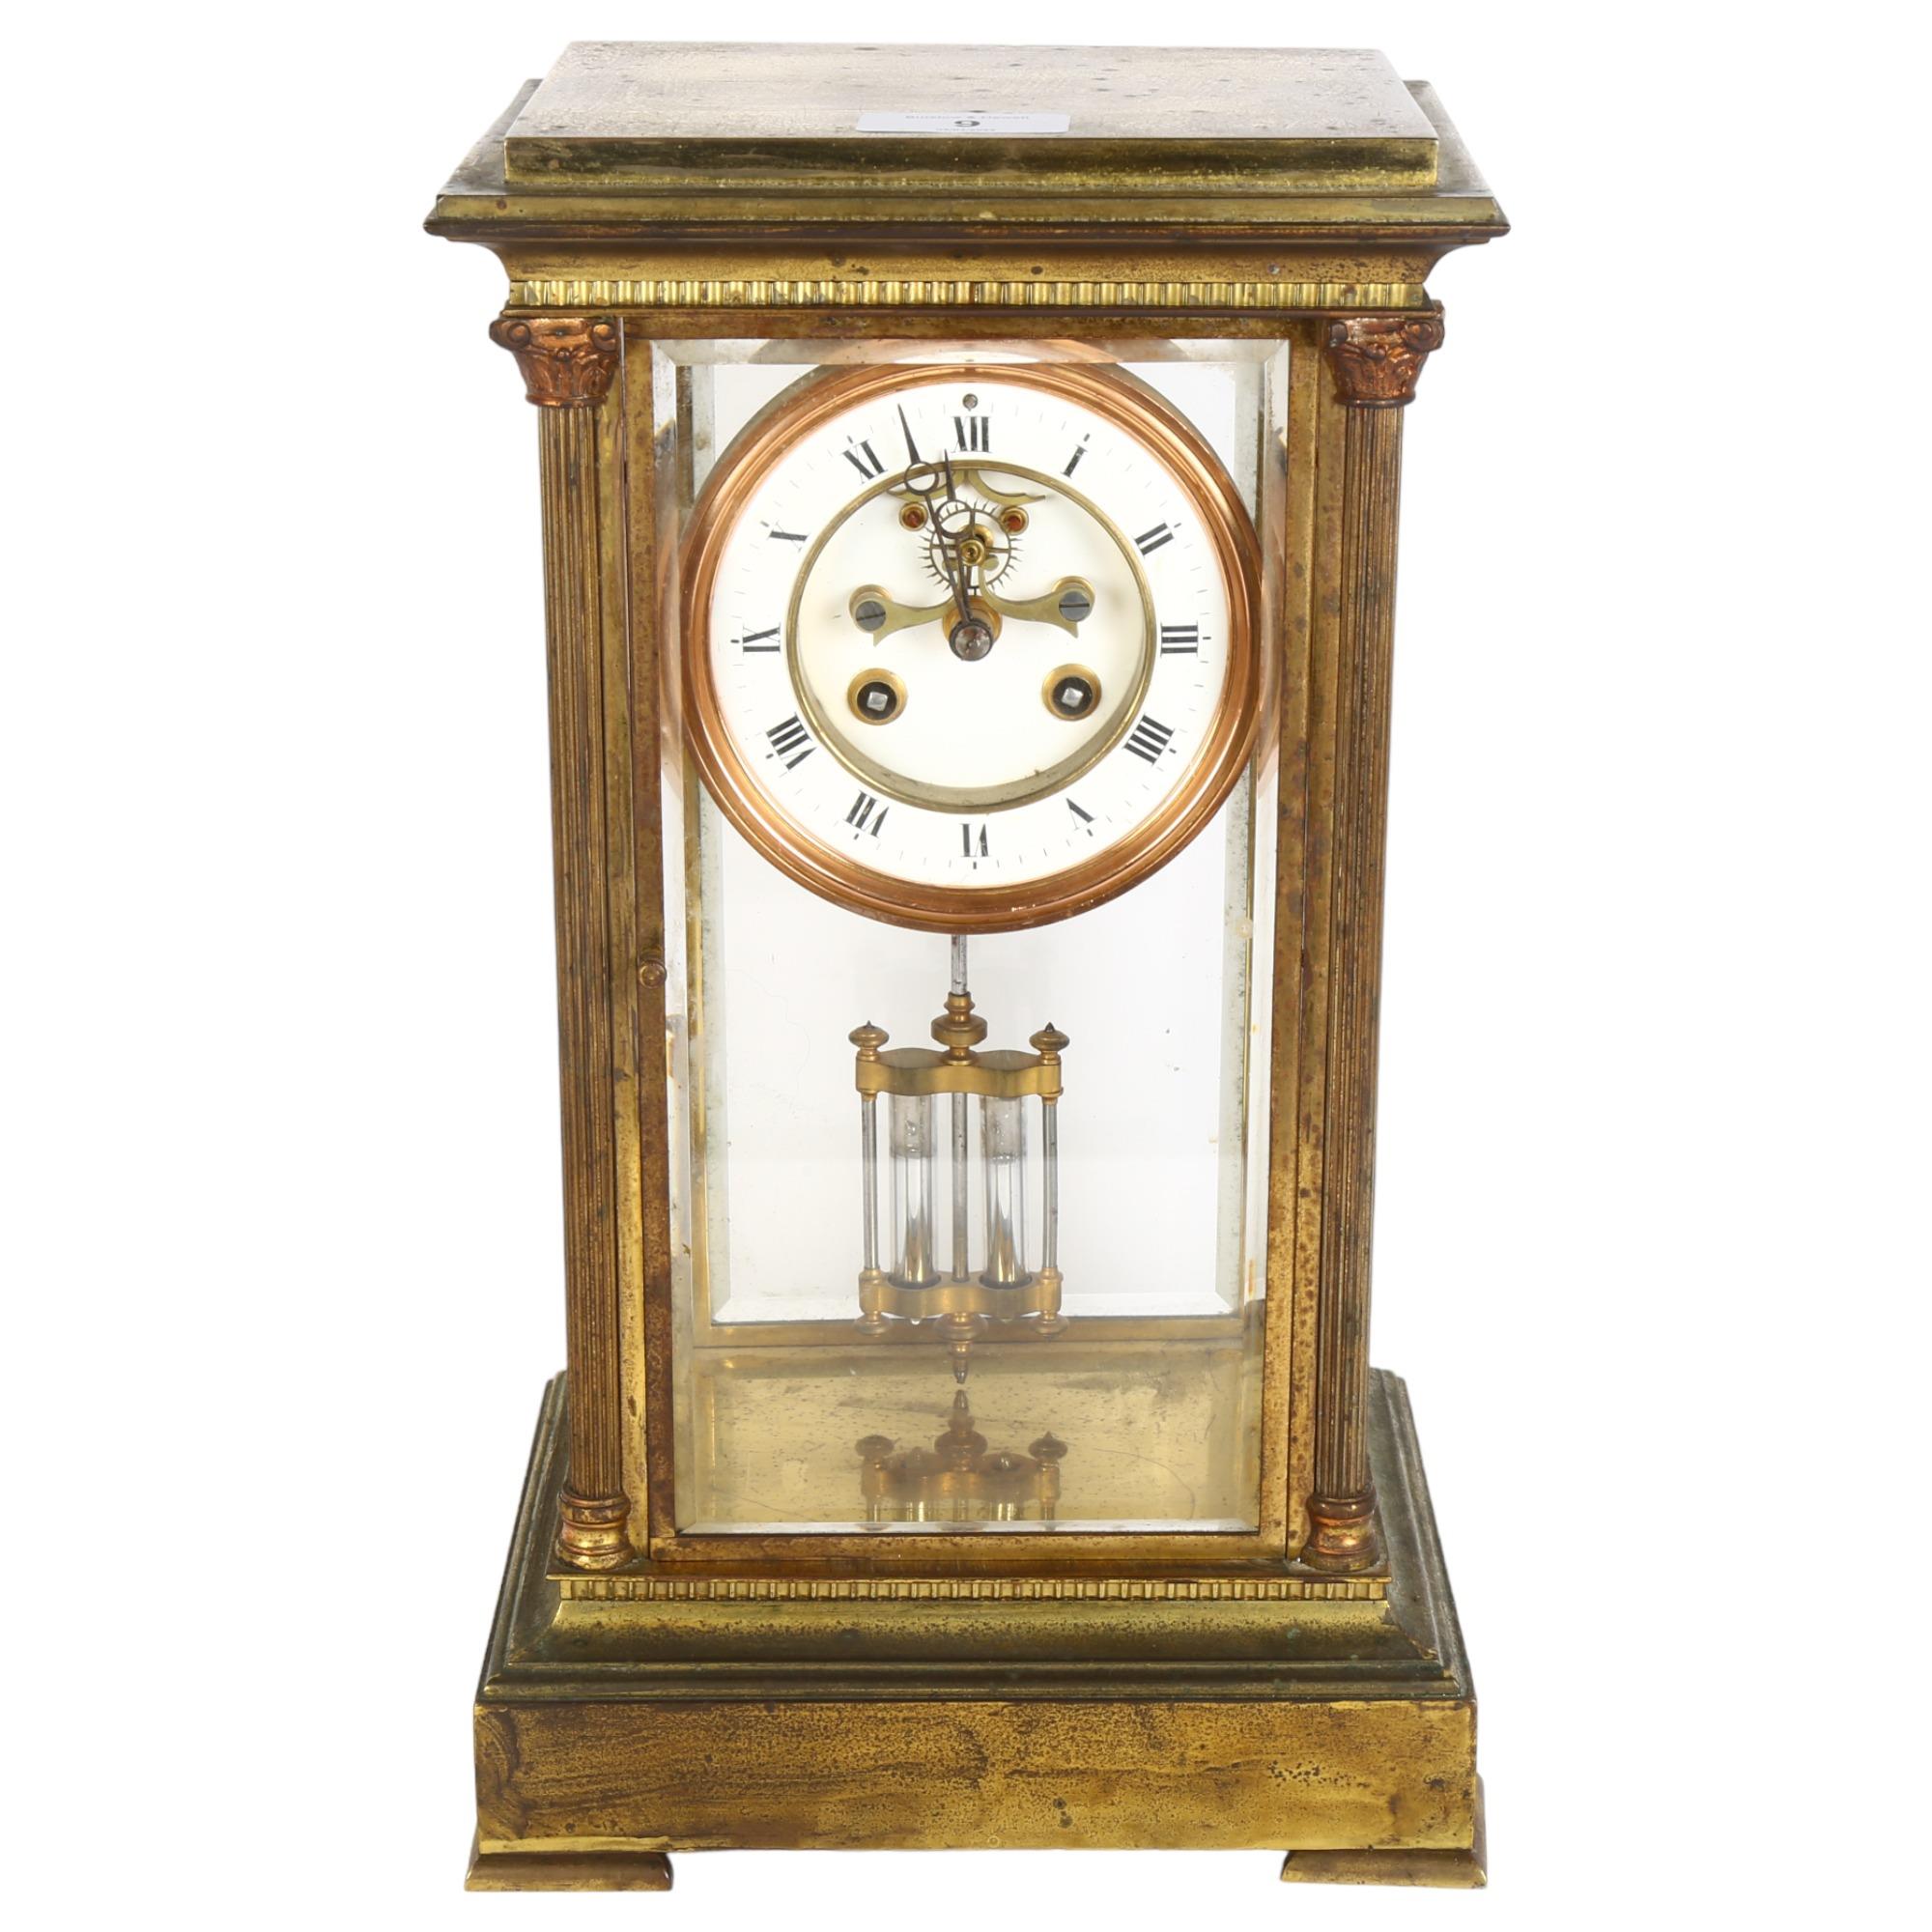 A brass-cased 8-day 4-glass mantel clock, with white enamel dial, Roman numerals, and open